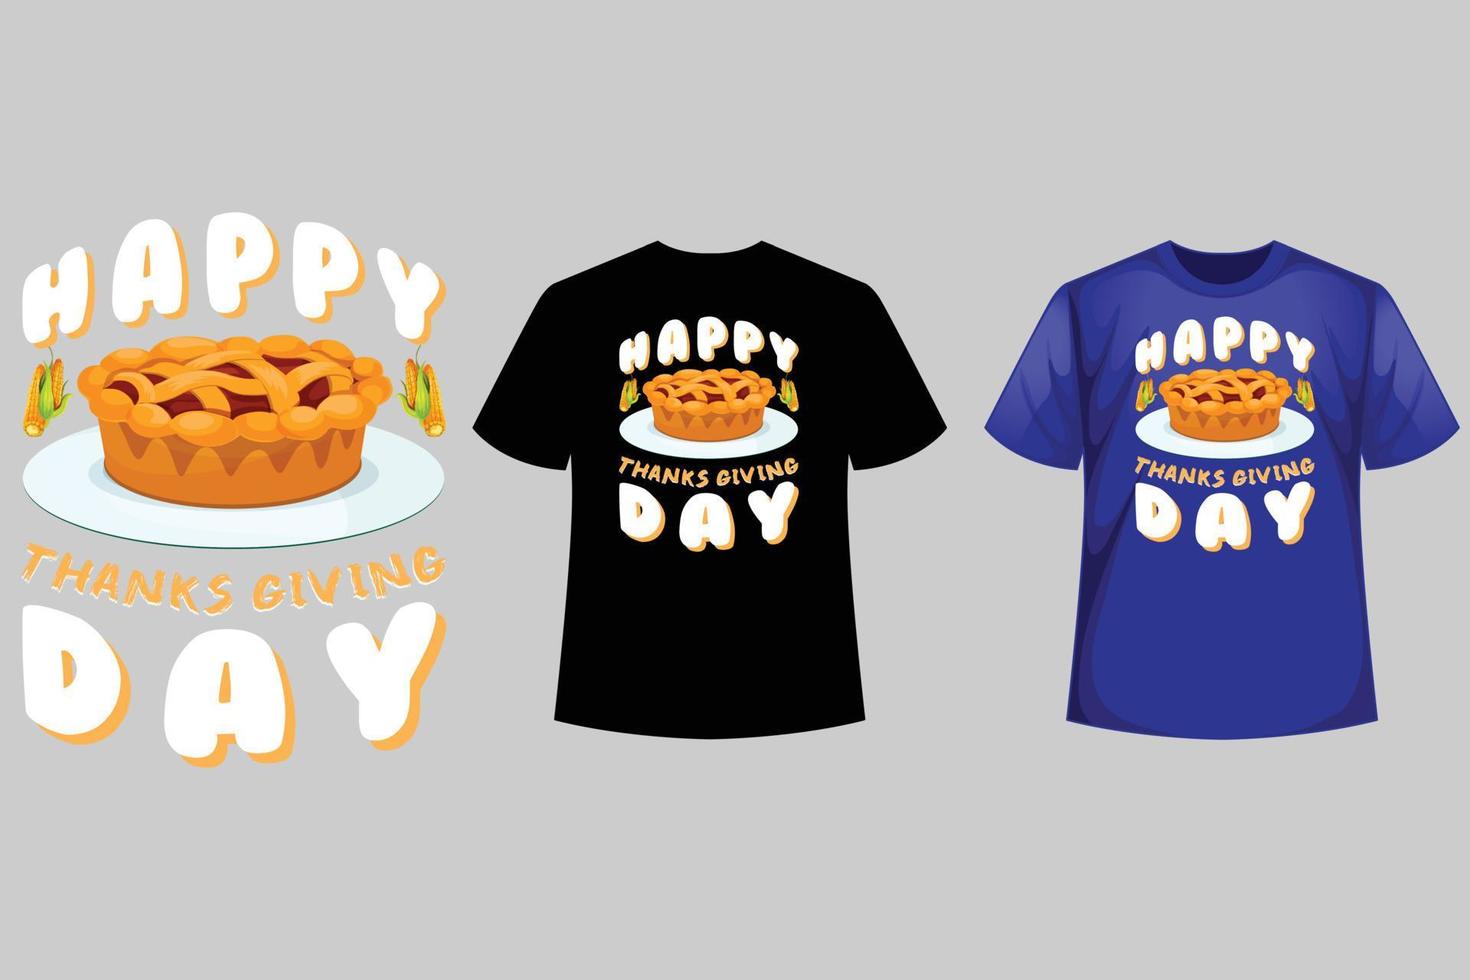 Happy Thanksgiving day t-shirt vector